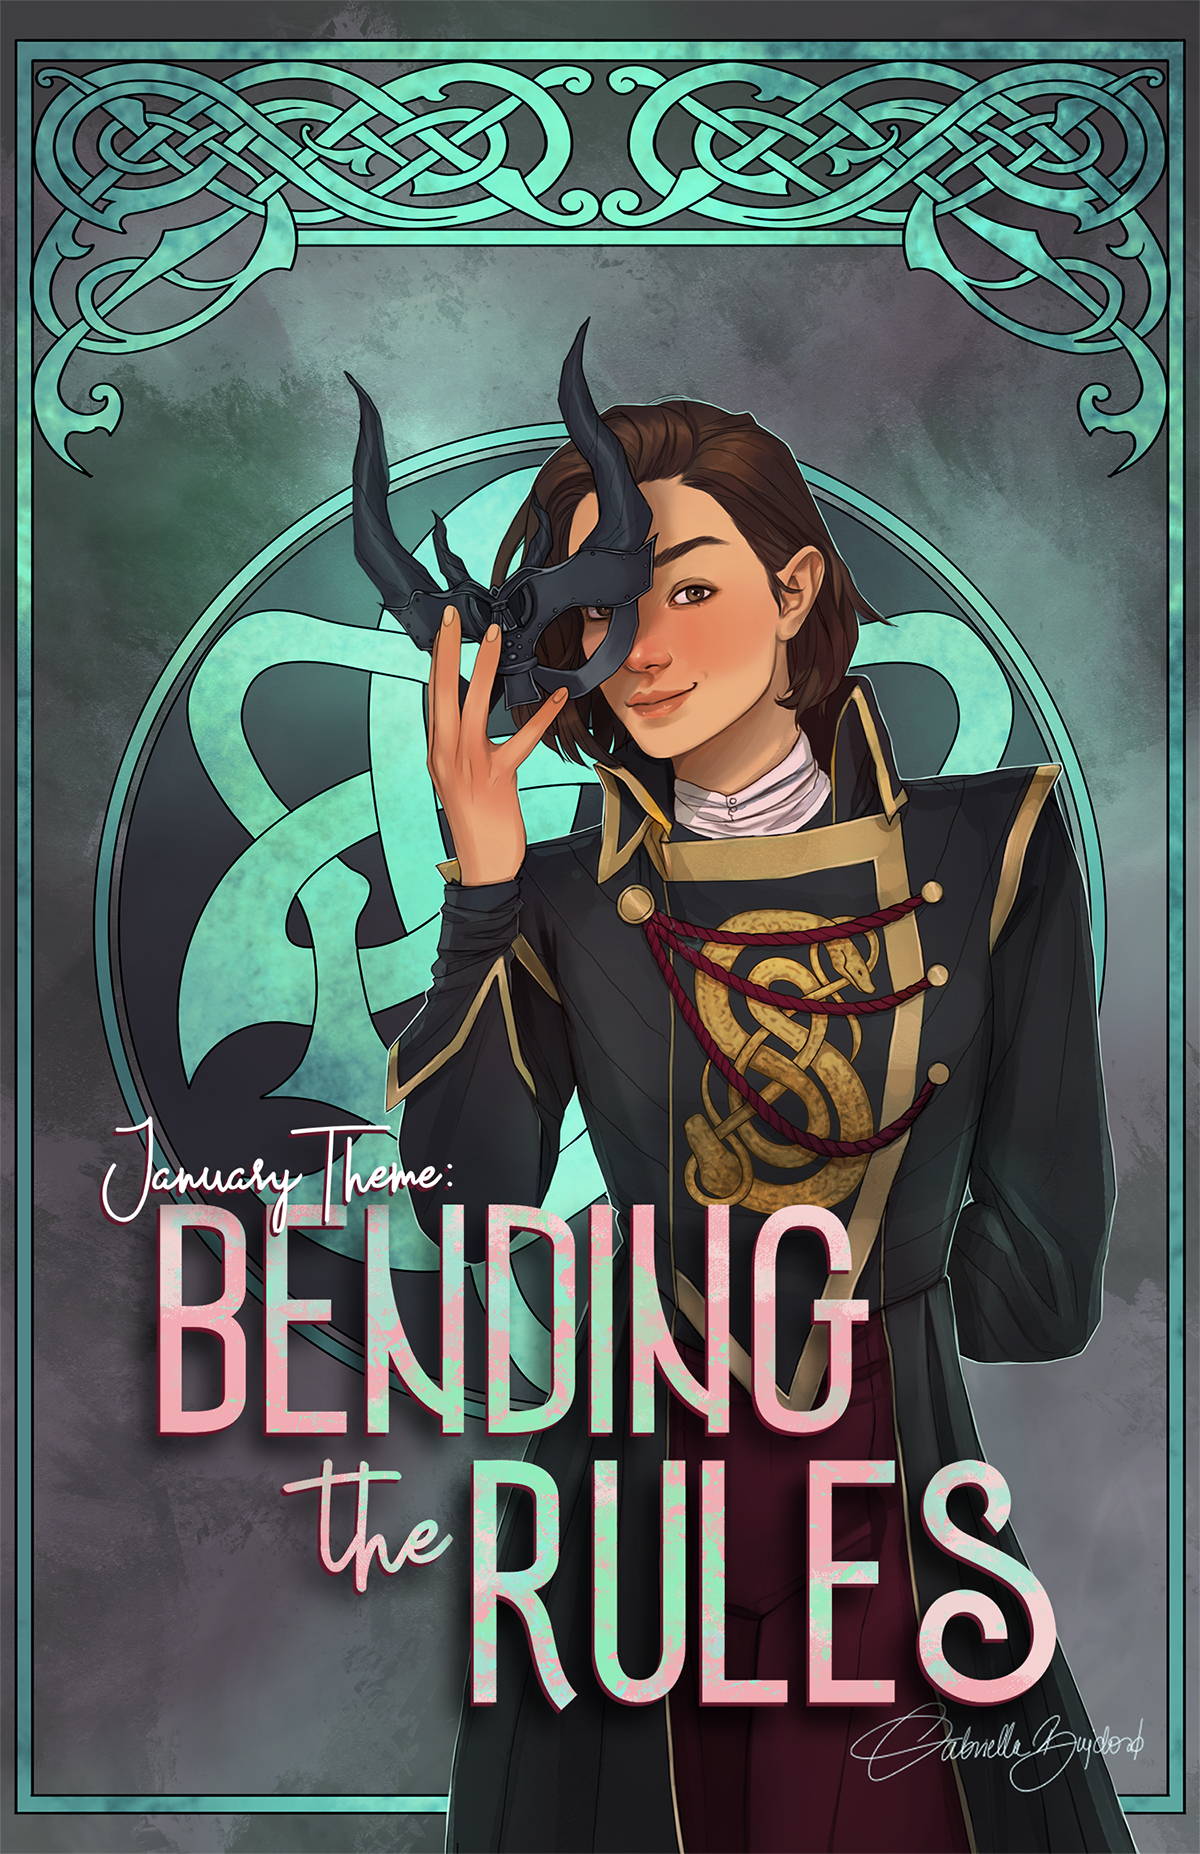 January Theme: Bending the Rules